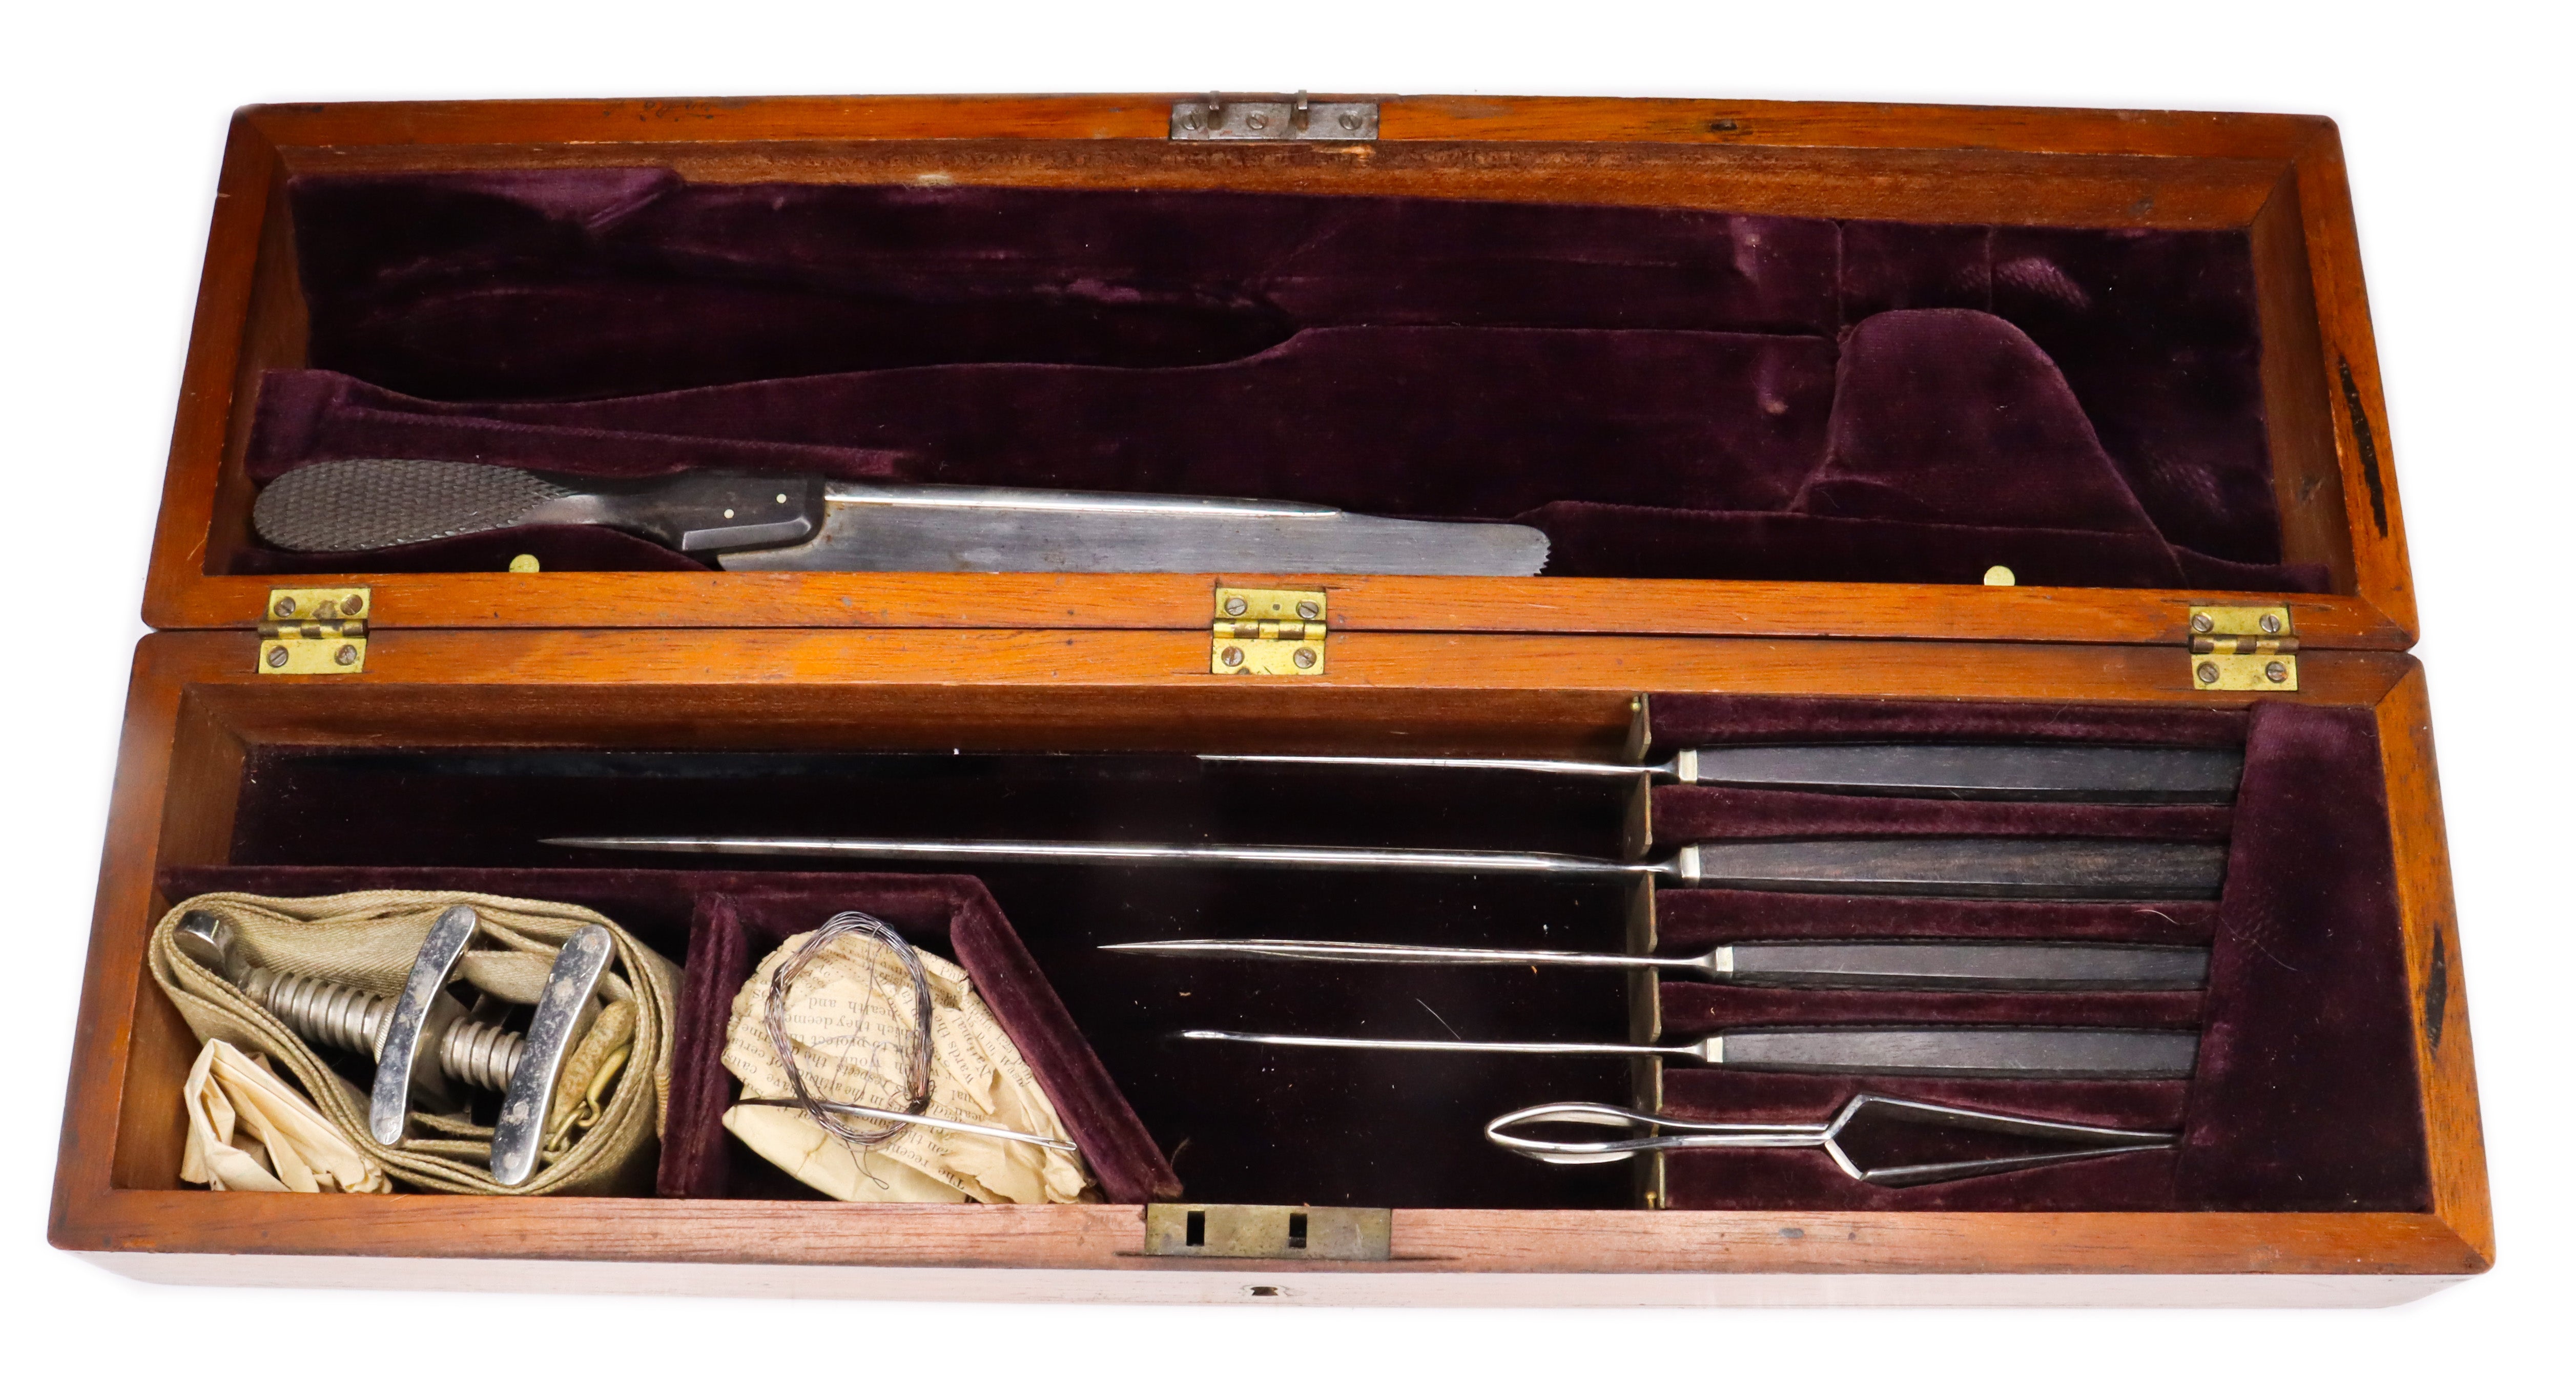 Post Civil War Medical Amputation Set Made in Pittsburgh by Feick Brothers